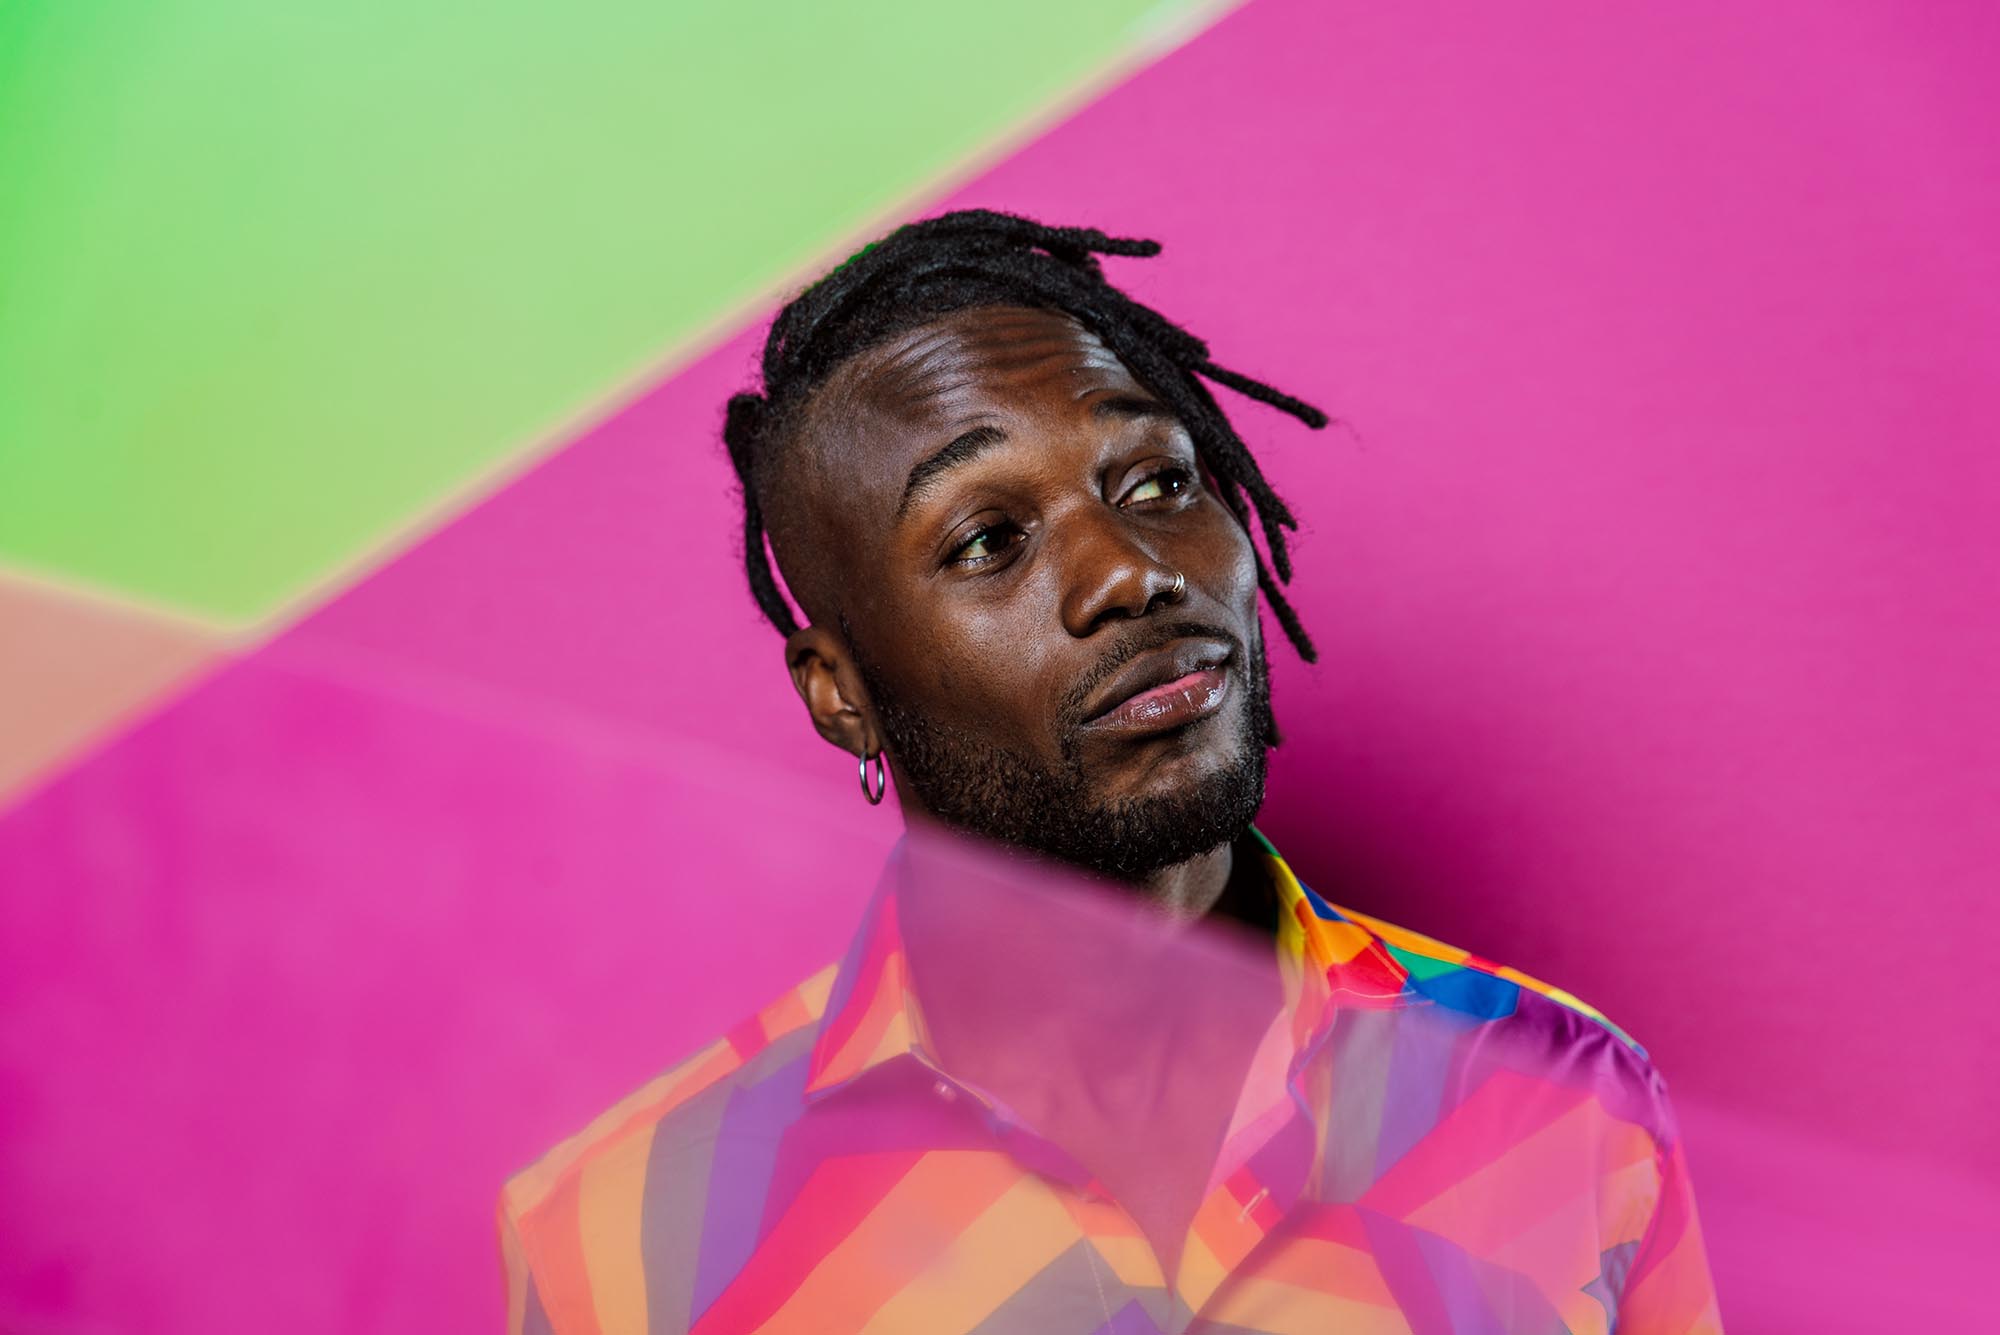 artistic portrait of an African American man wearing colorful shirt posing on pink and green backgrounds